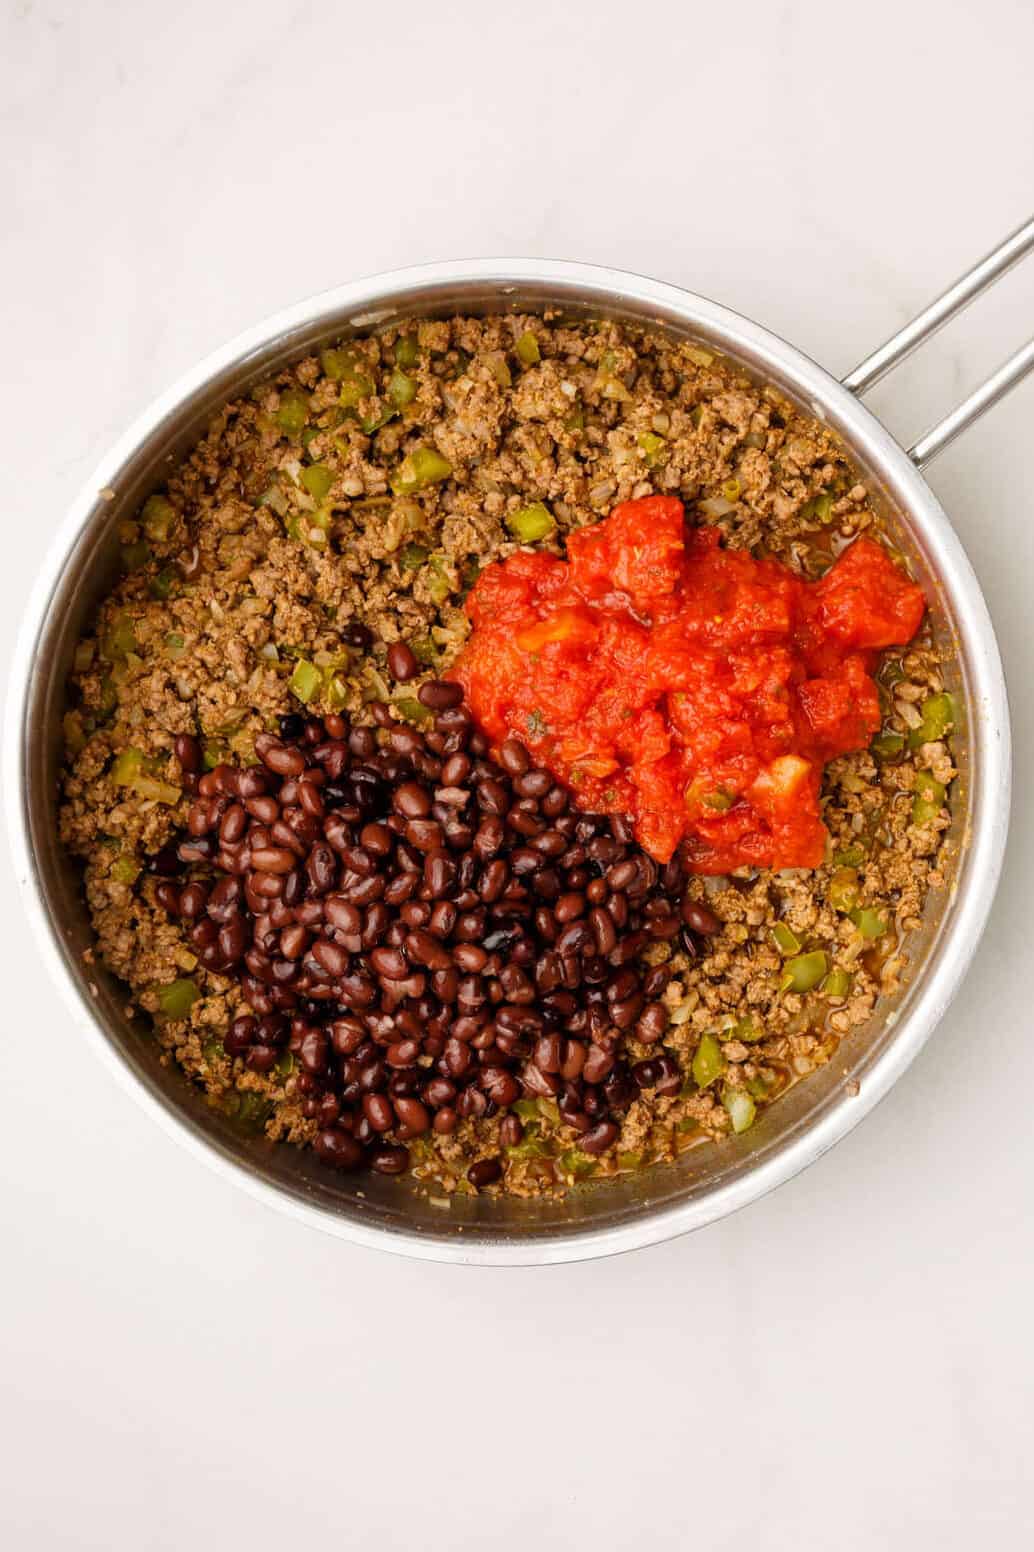 cooked ground beef, onion, green bell peppers, black beans and rotel tomatoes in a stainless steel pan.